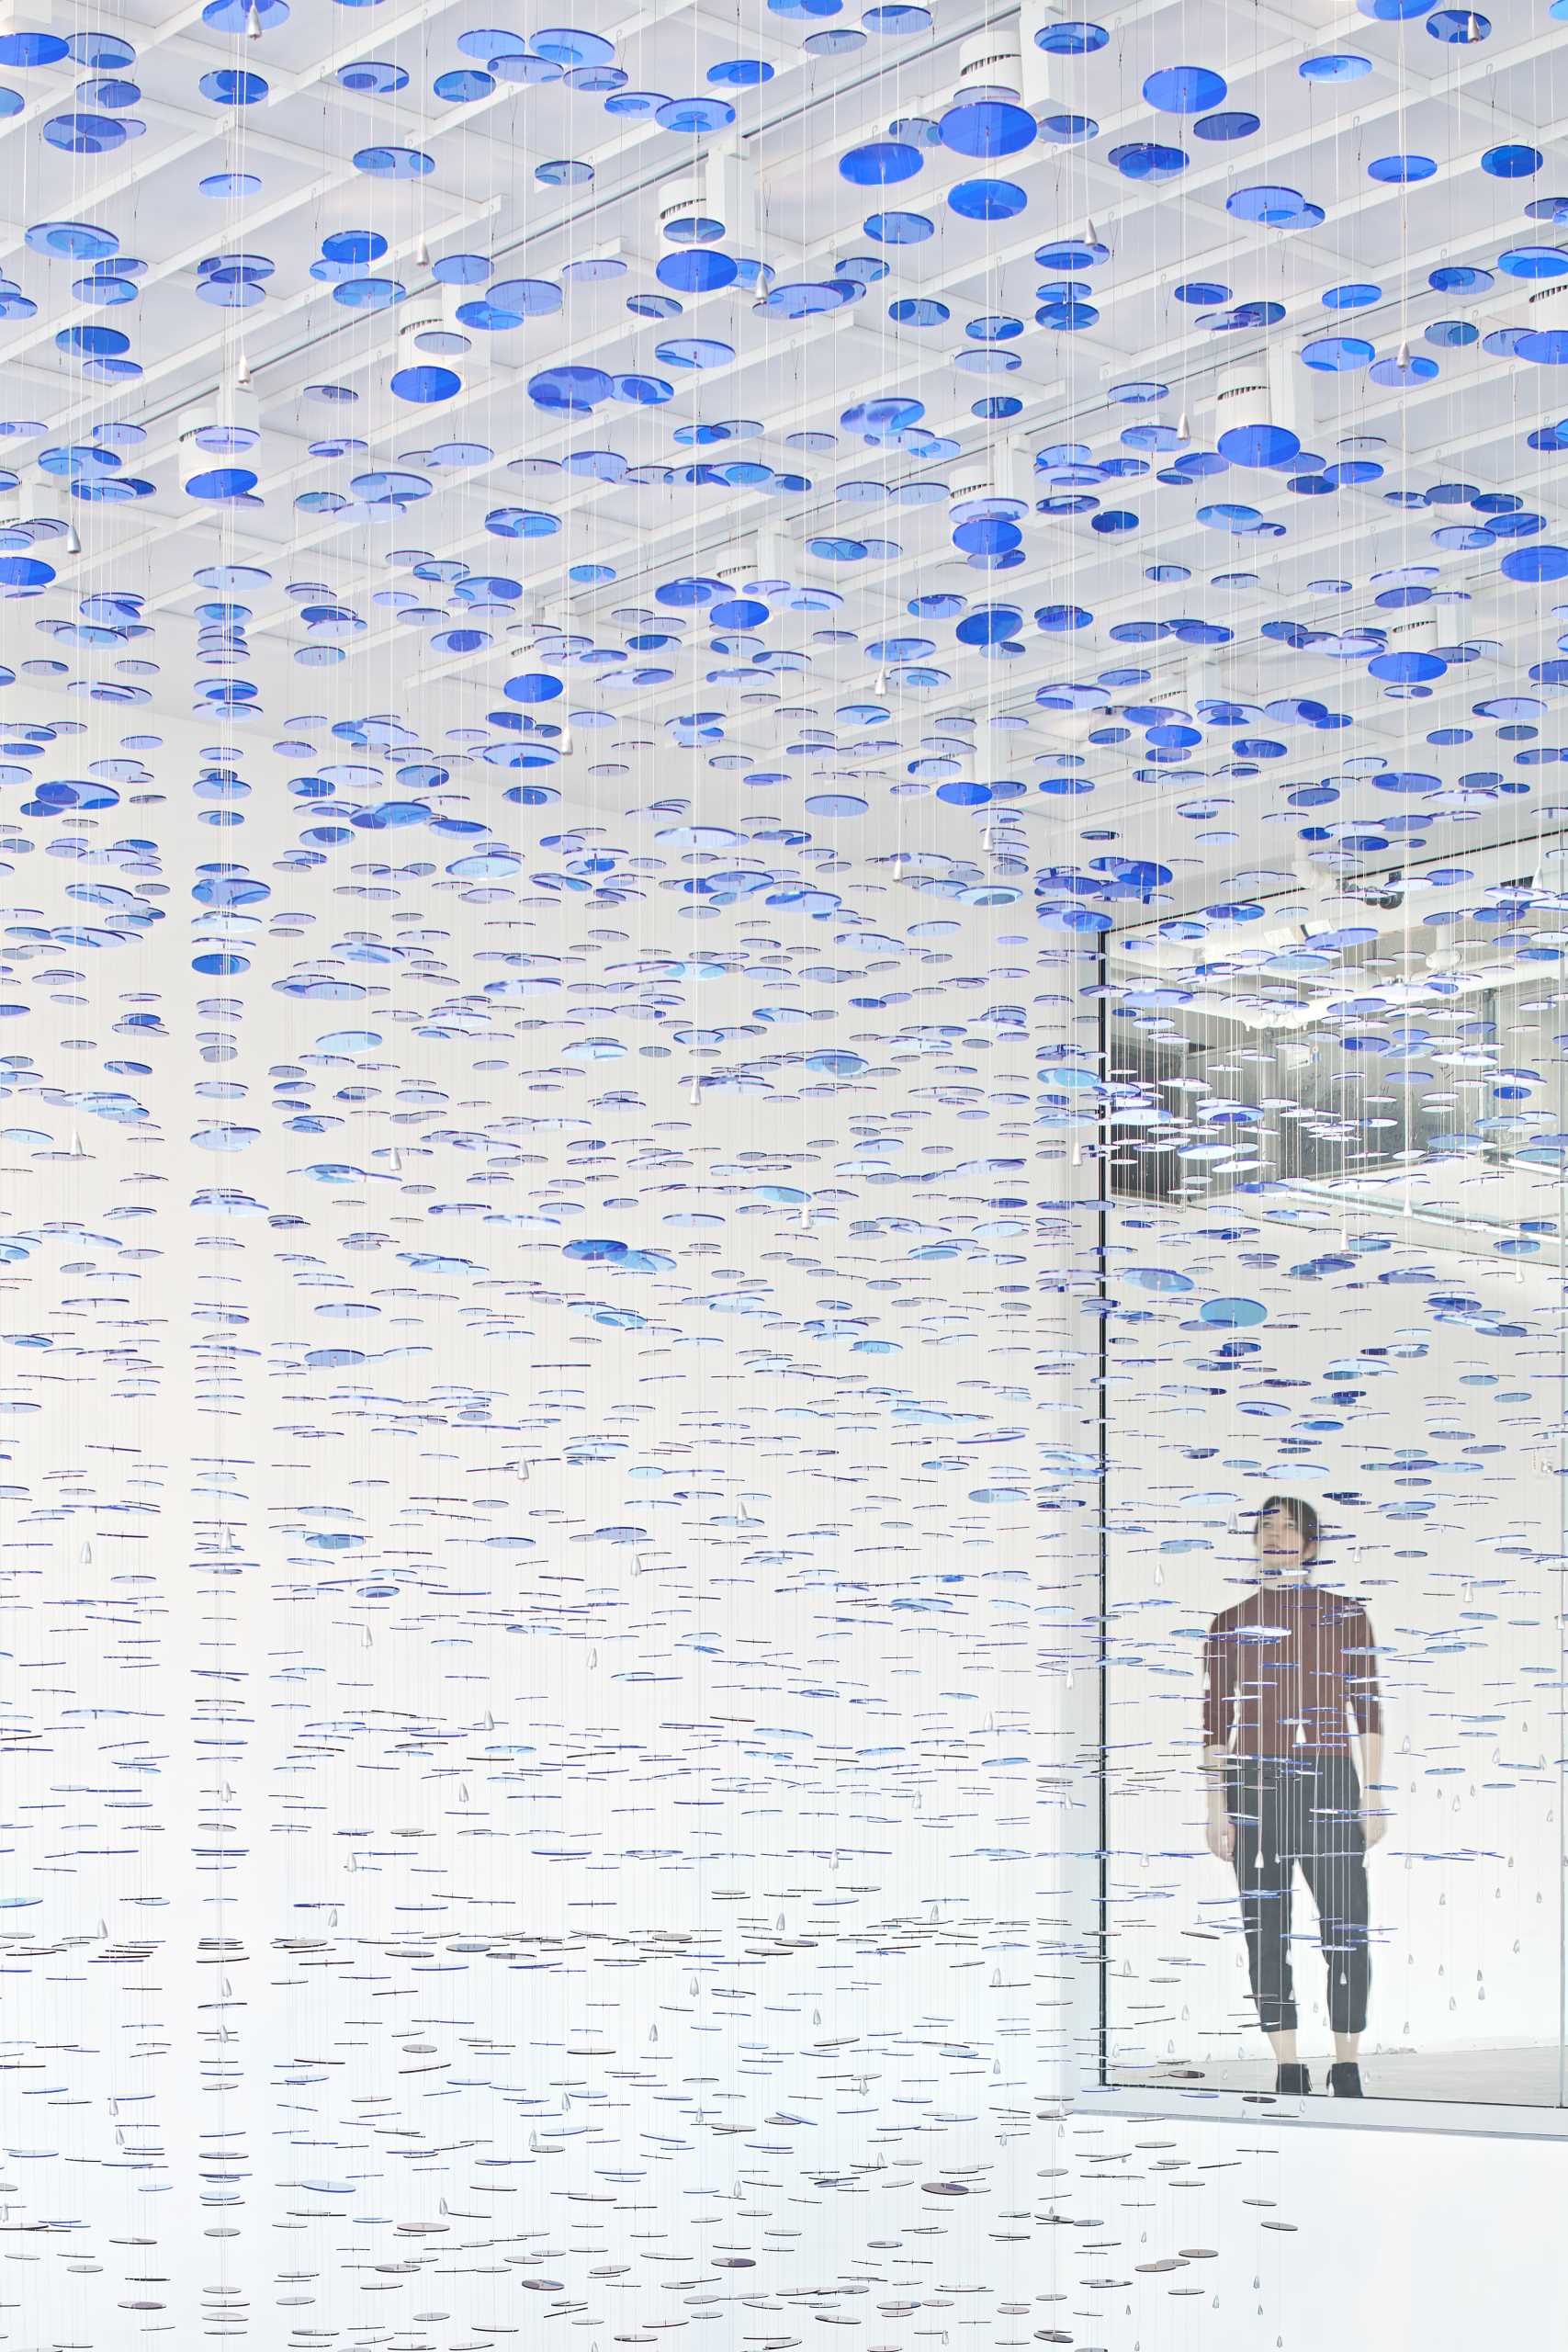 A custom art installation in a lobby atrium is made from 8,000 colorful discs suspended from 650 wire cables.